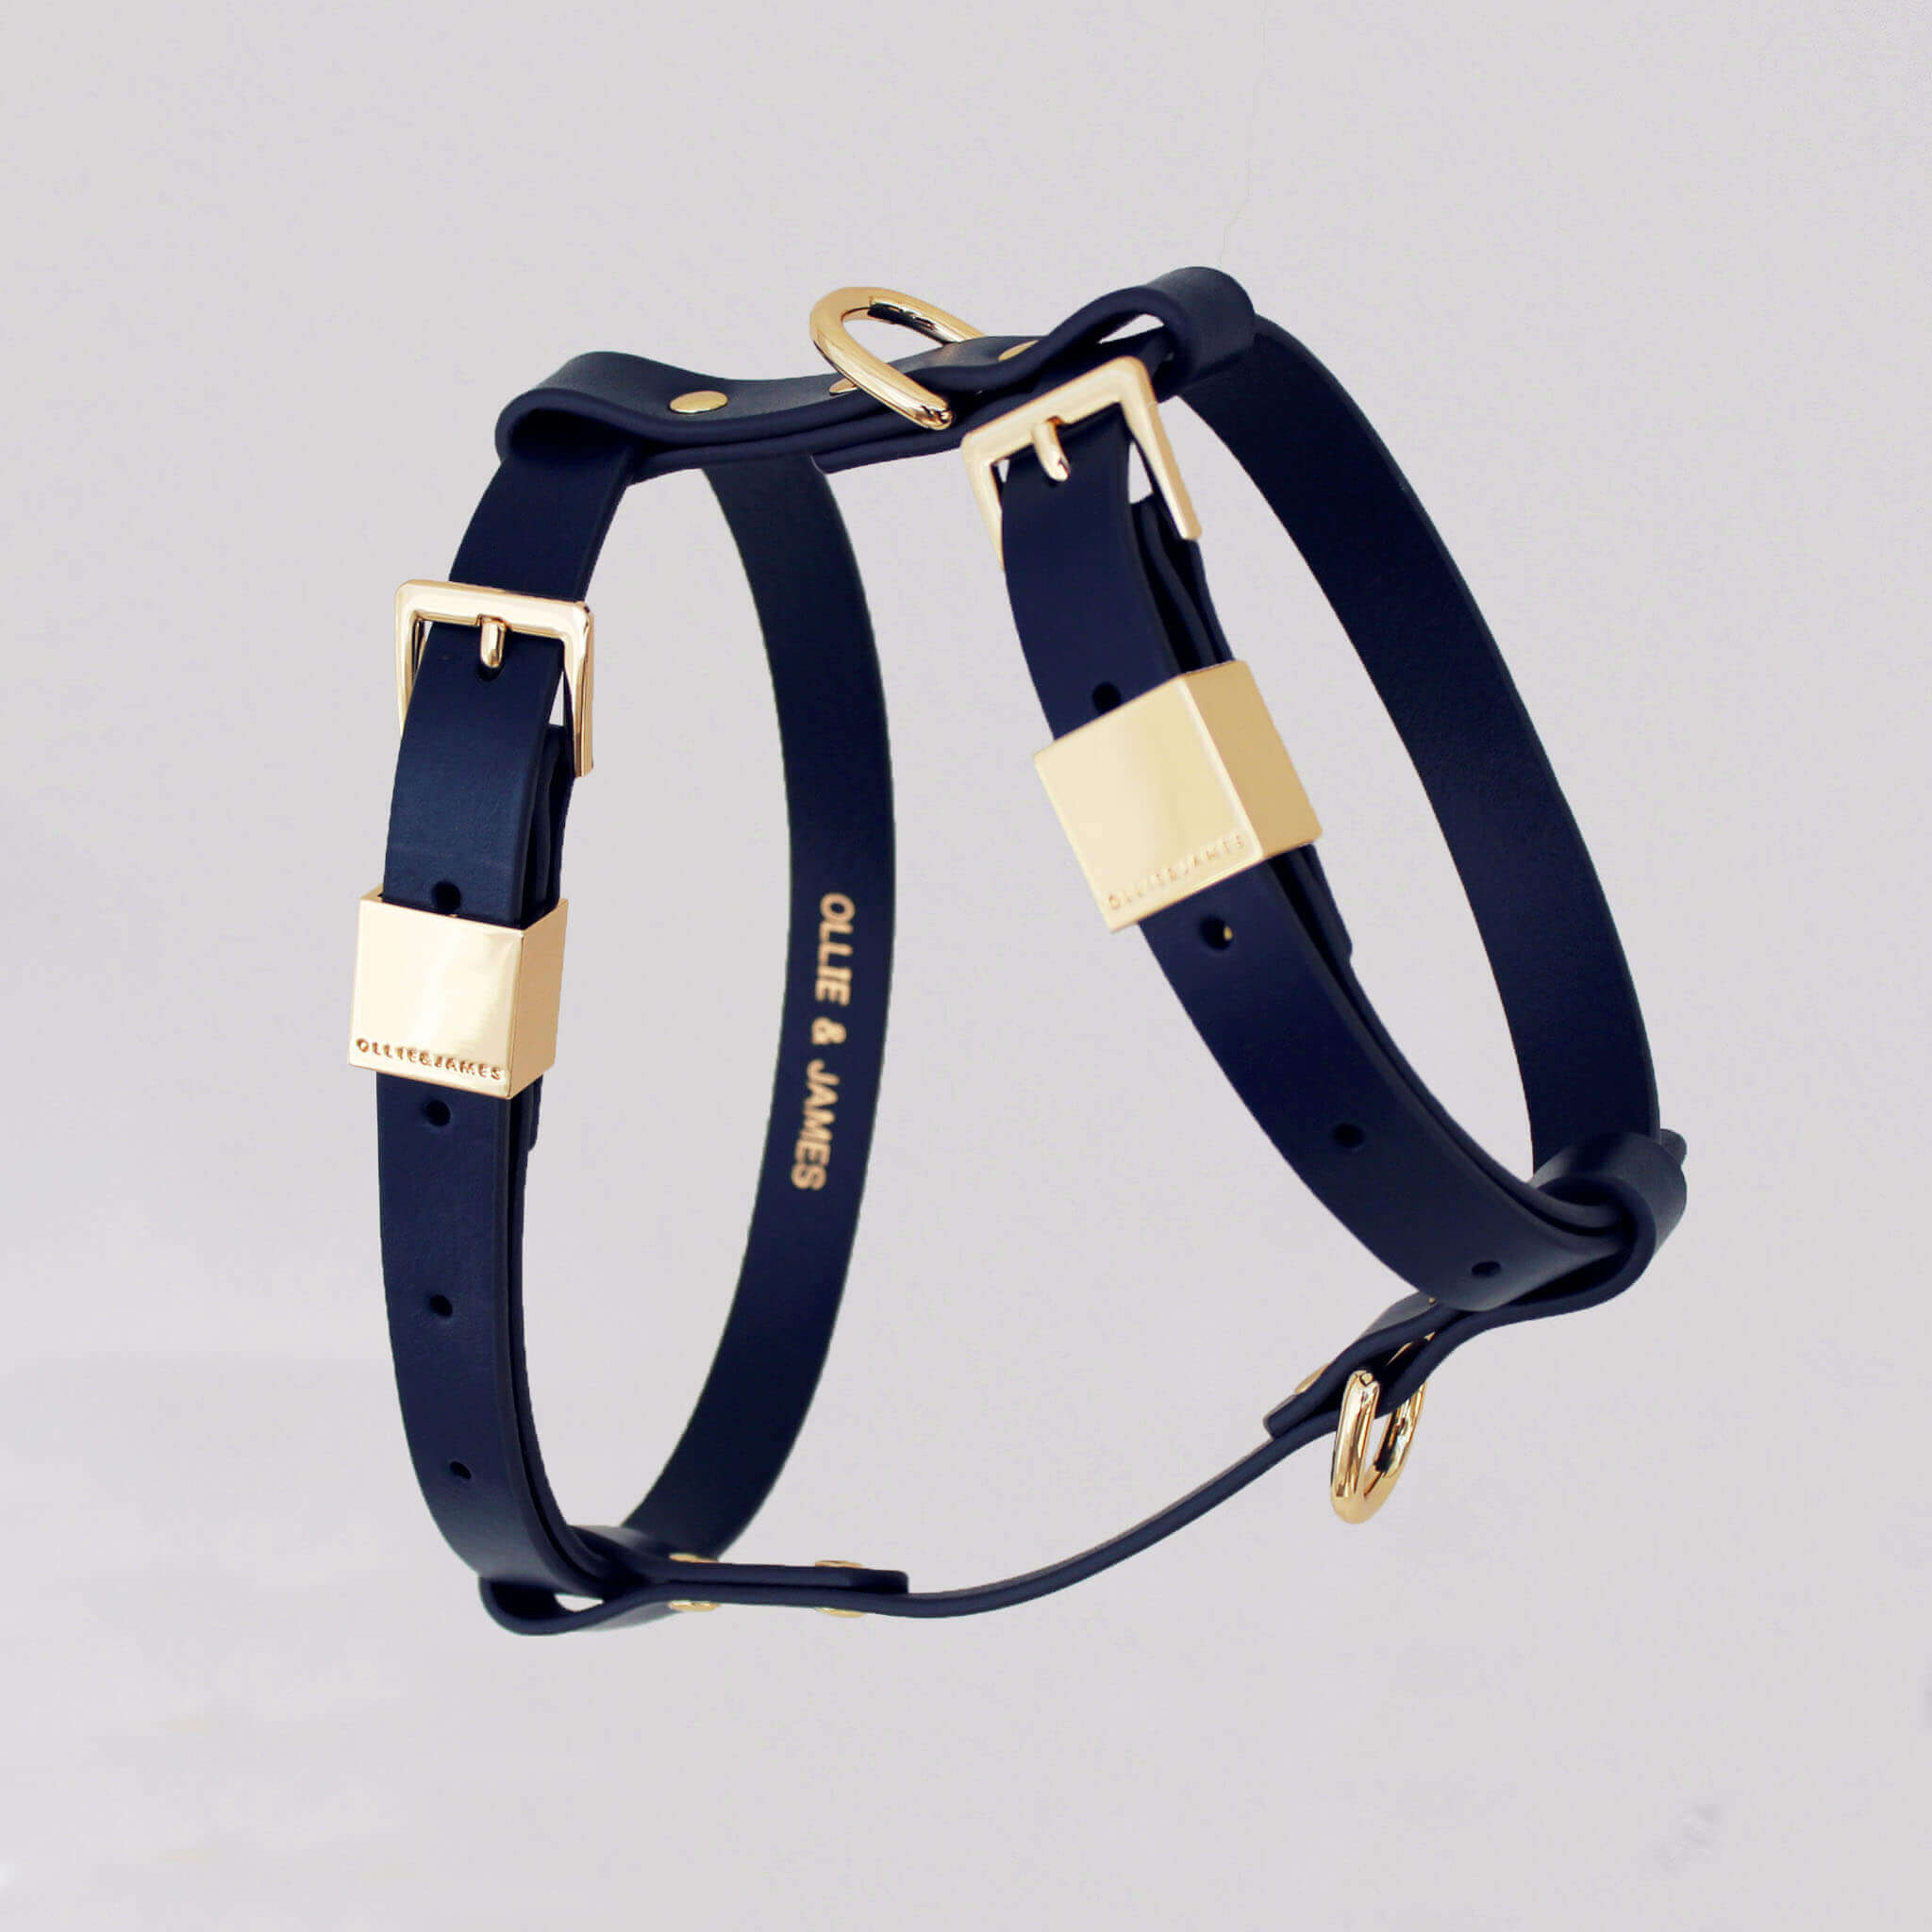 Luxury leather dog harness in ink.